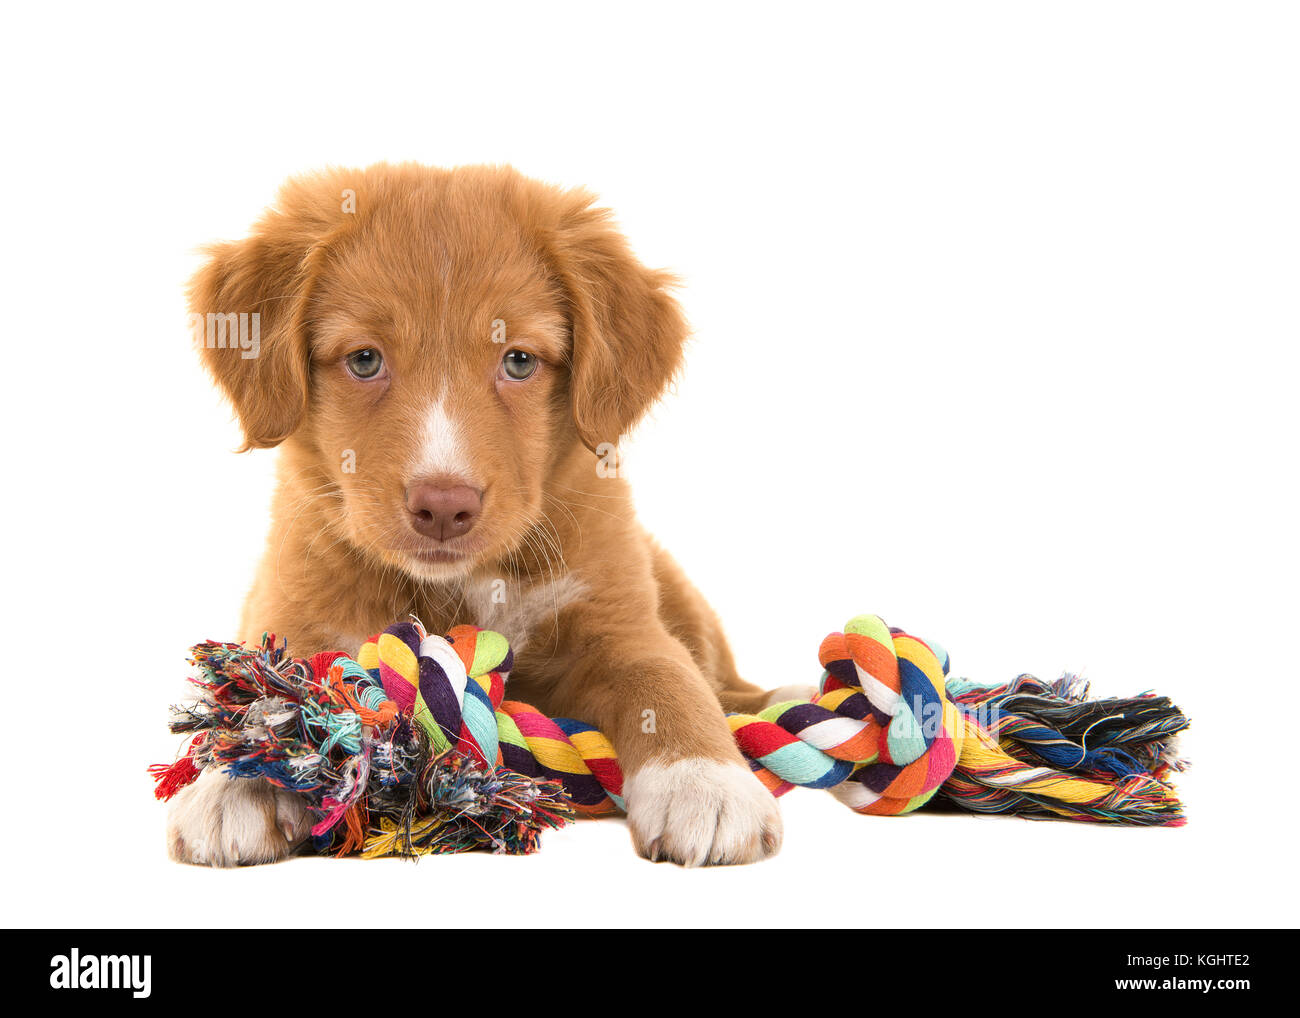 Cute nova scotia duck tolling retriever puppy seen from the front facing the camera lying on the floor holding a multicolored woven rope dog toy Stock Photo